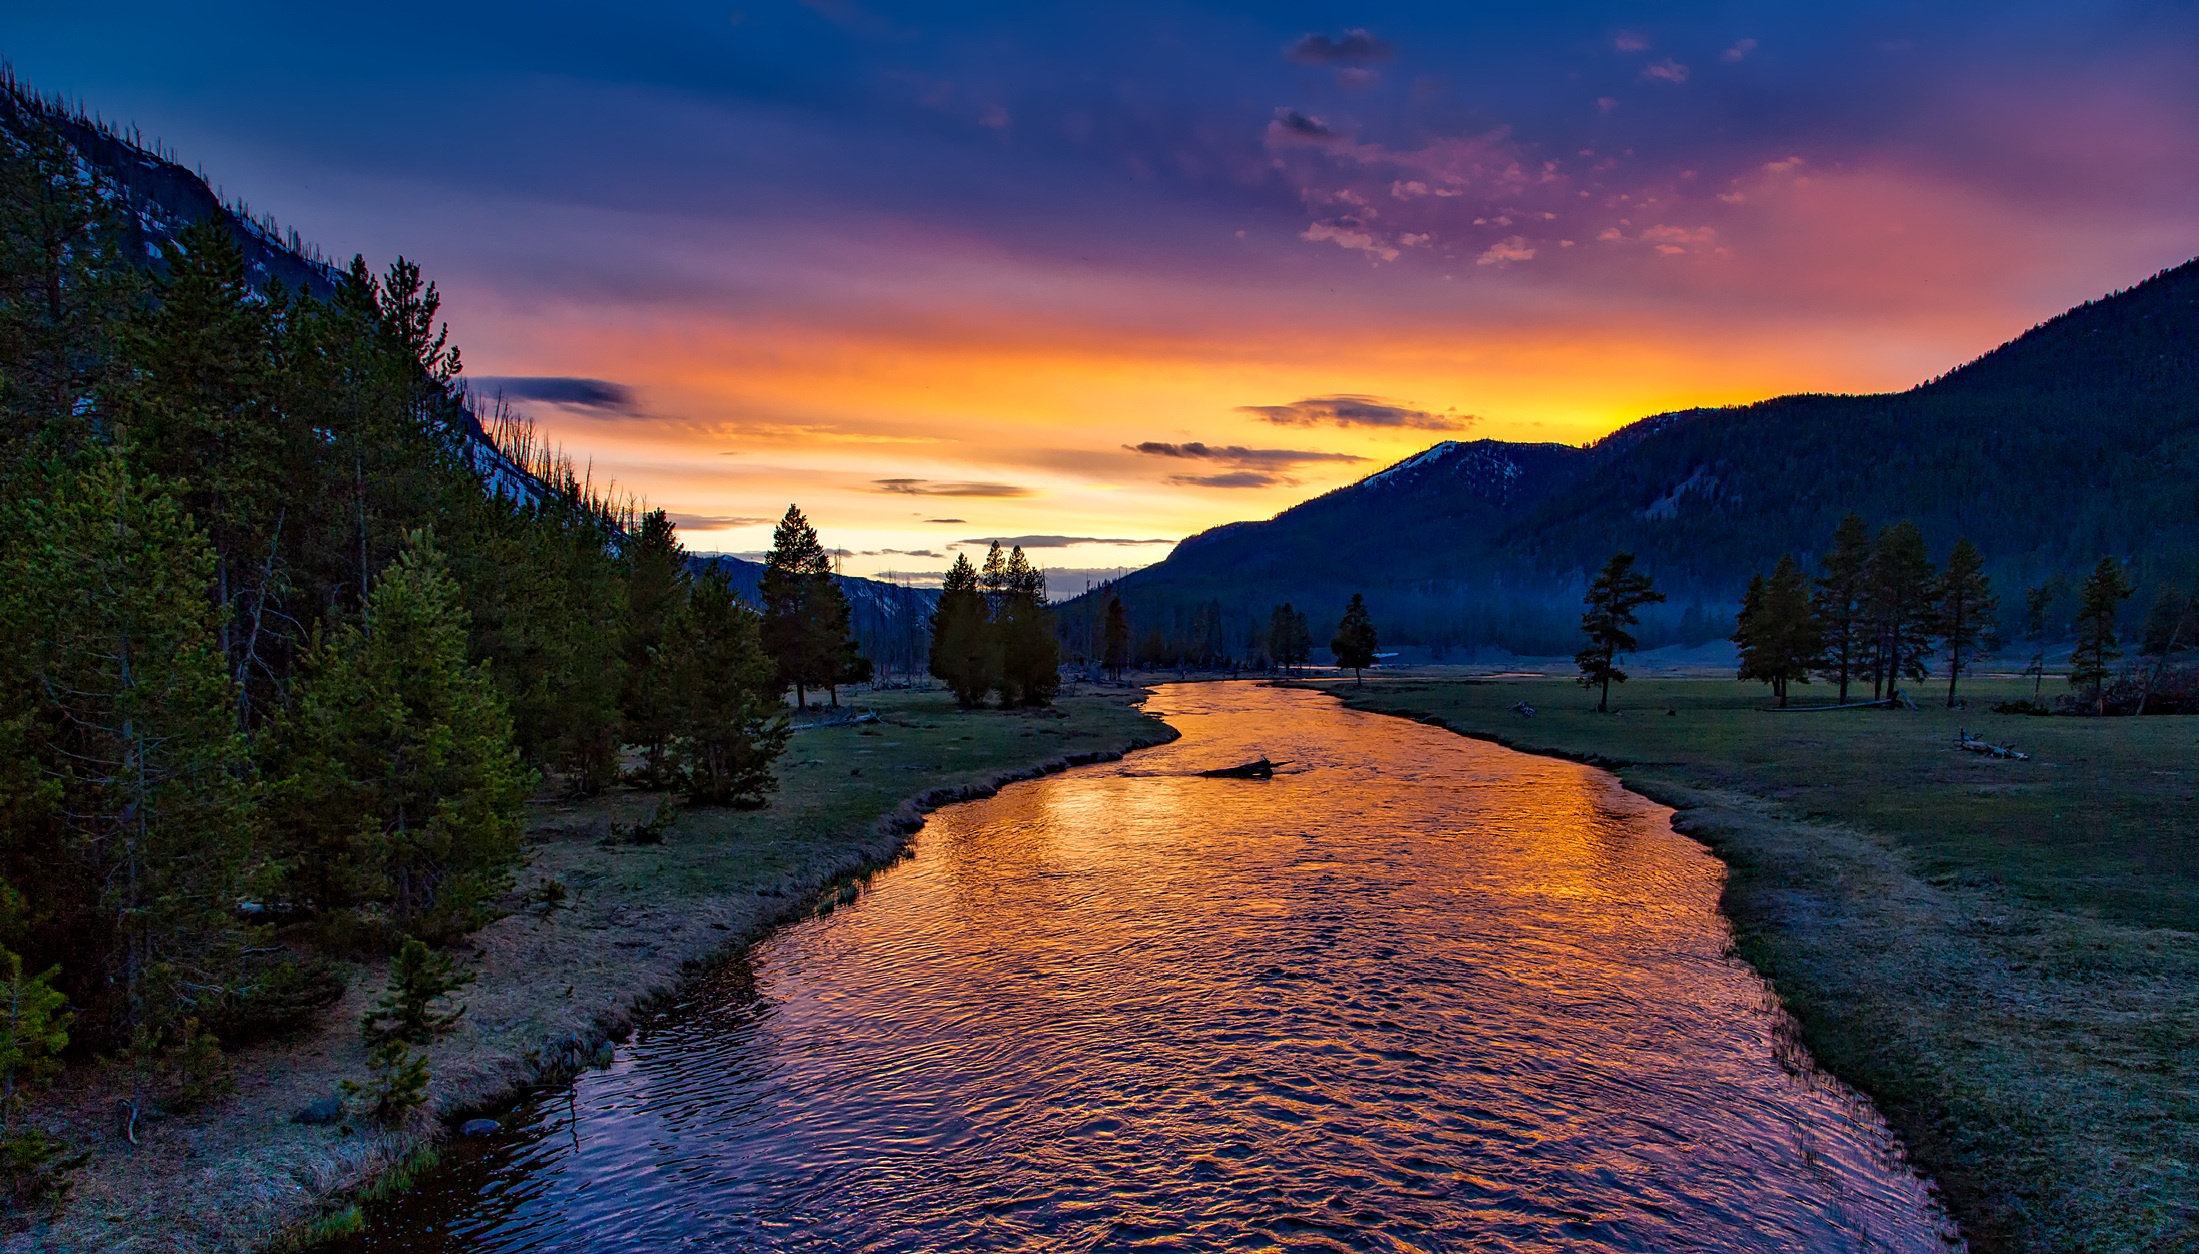 sunset, earth, yellowstone national park, dusk, hdr, mountain, national park, nature, river, scenic, tree, twilight, usa, wilderness